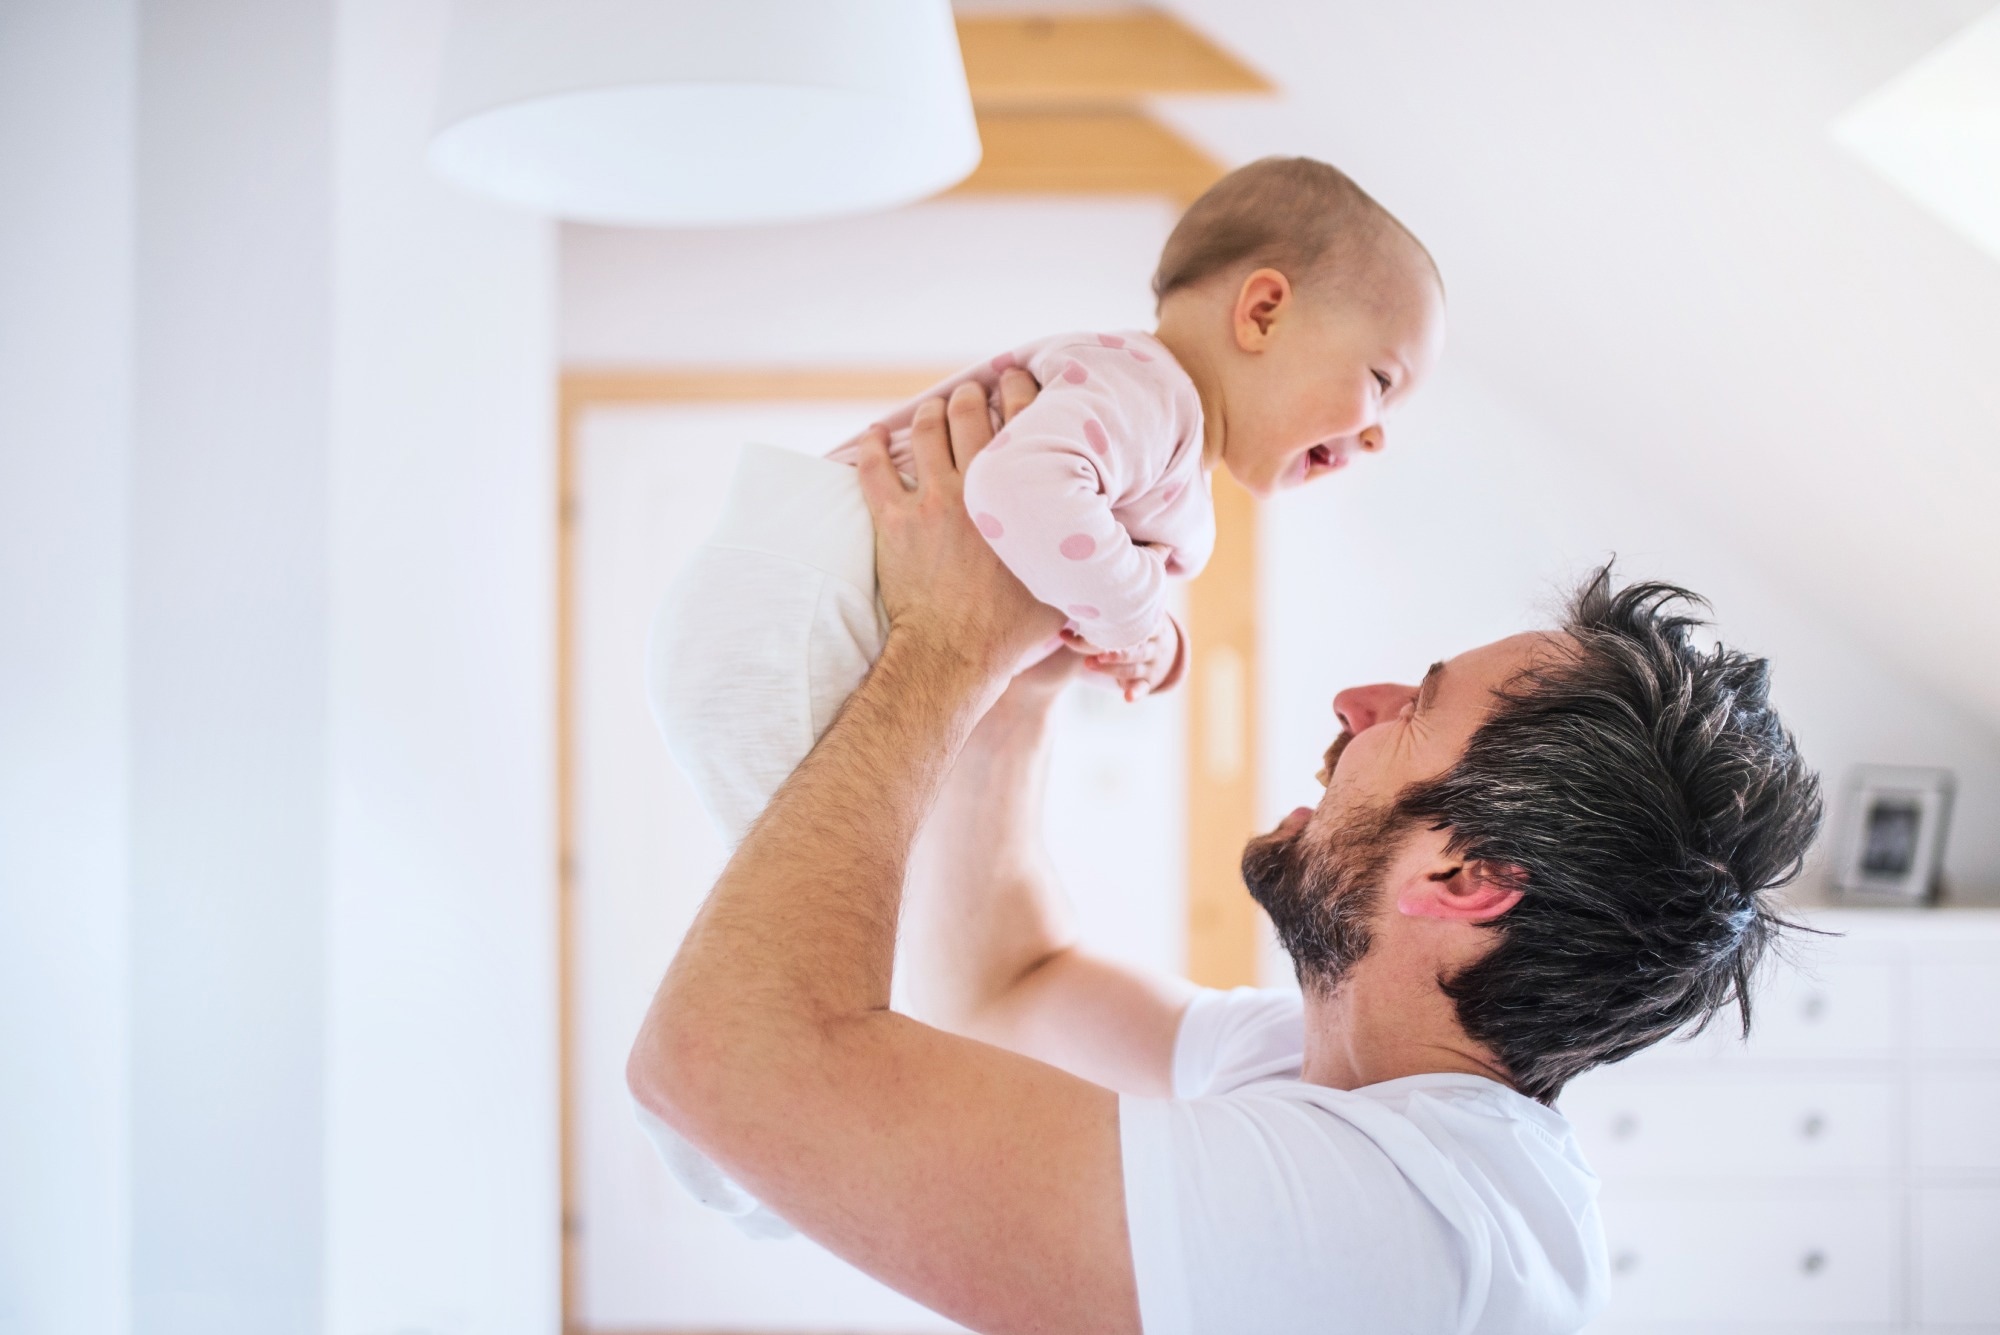 Study: Association of Recent Fatherhood With Antidepressant Treatment Initiation Among Men in the United Kingdom. Image Credit: GroundPicture/Shutterstock.com